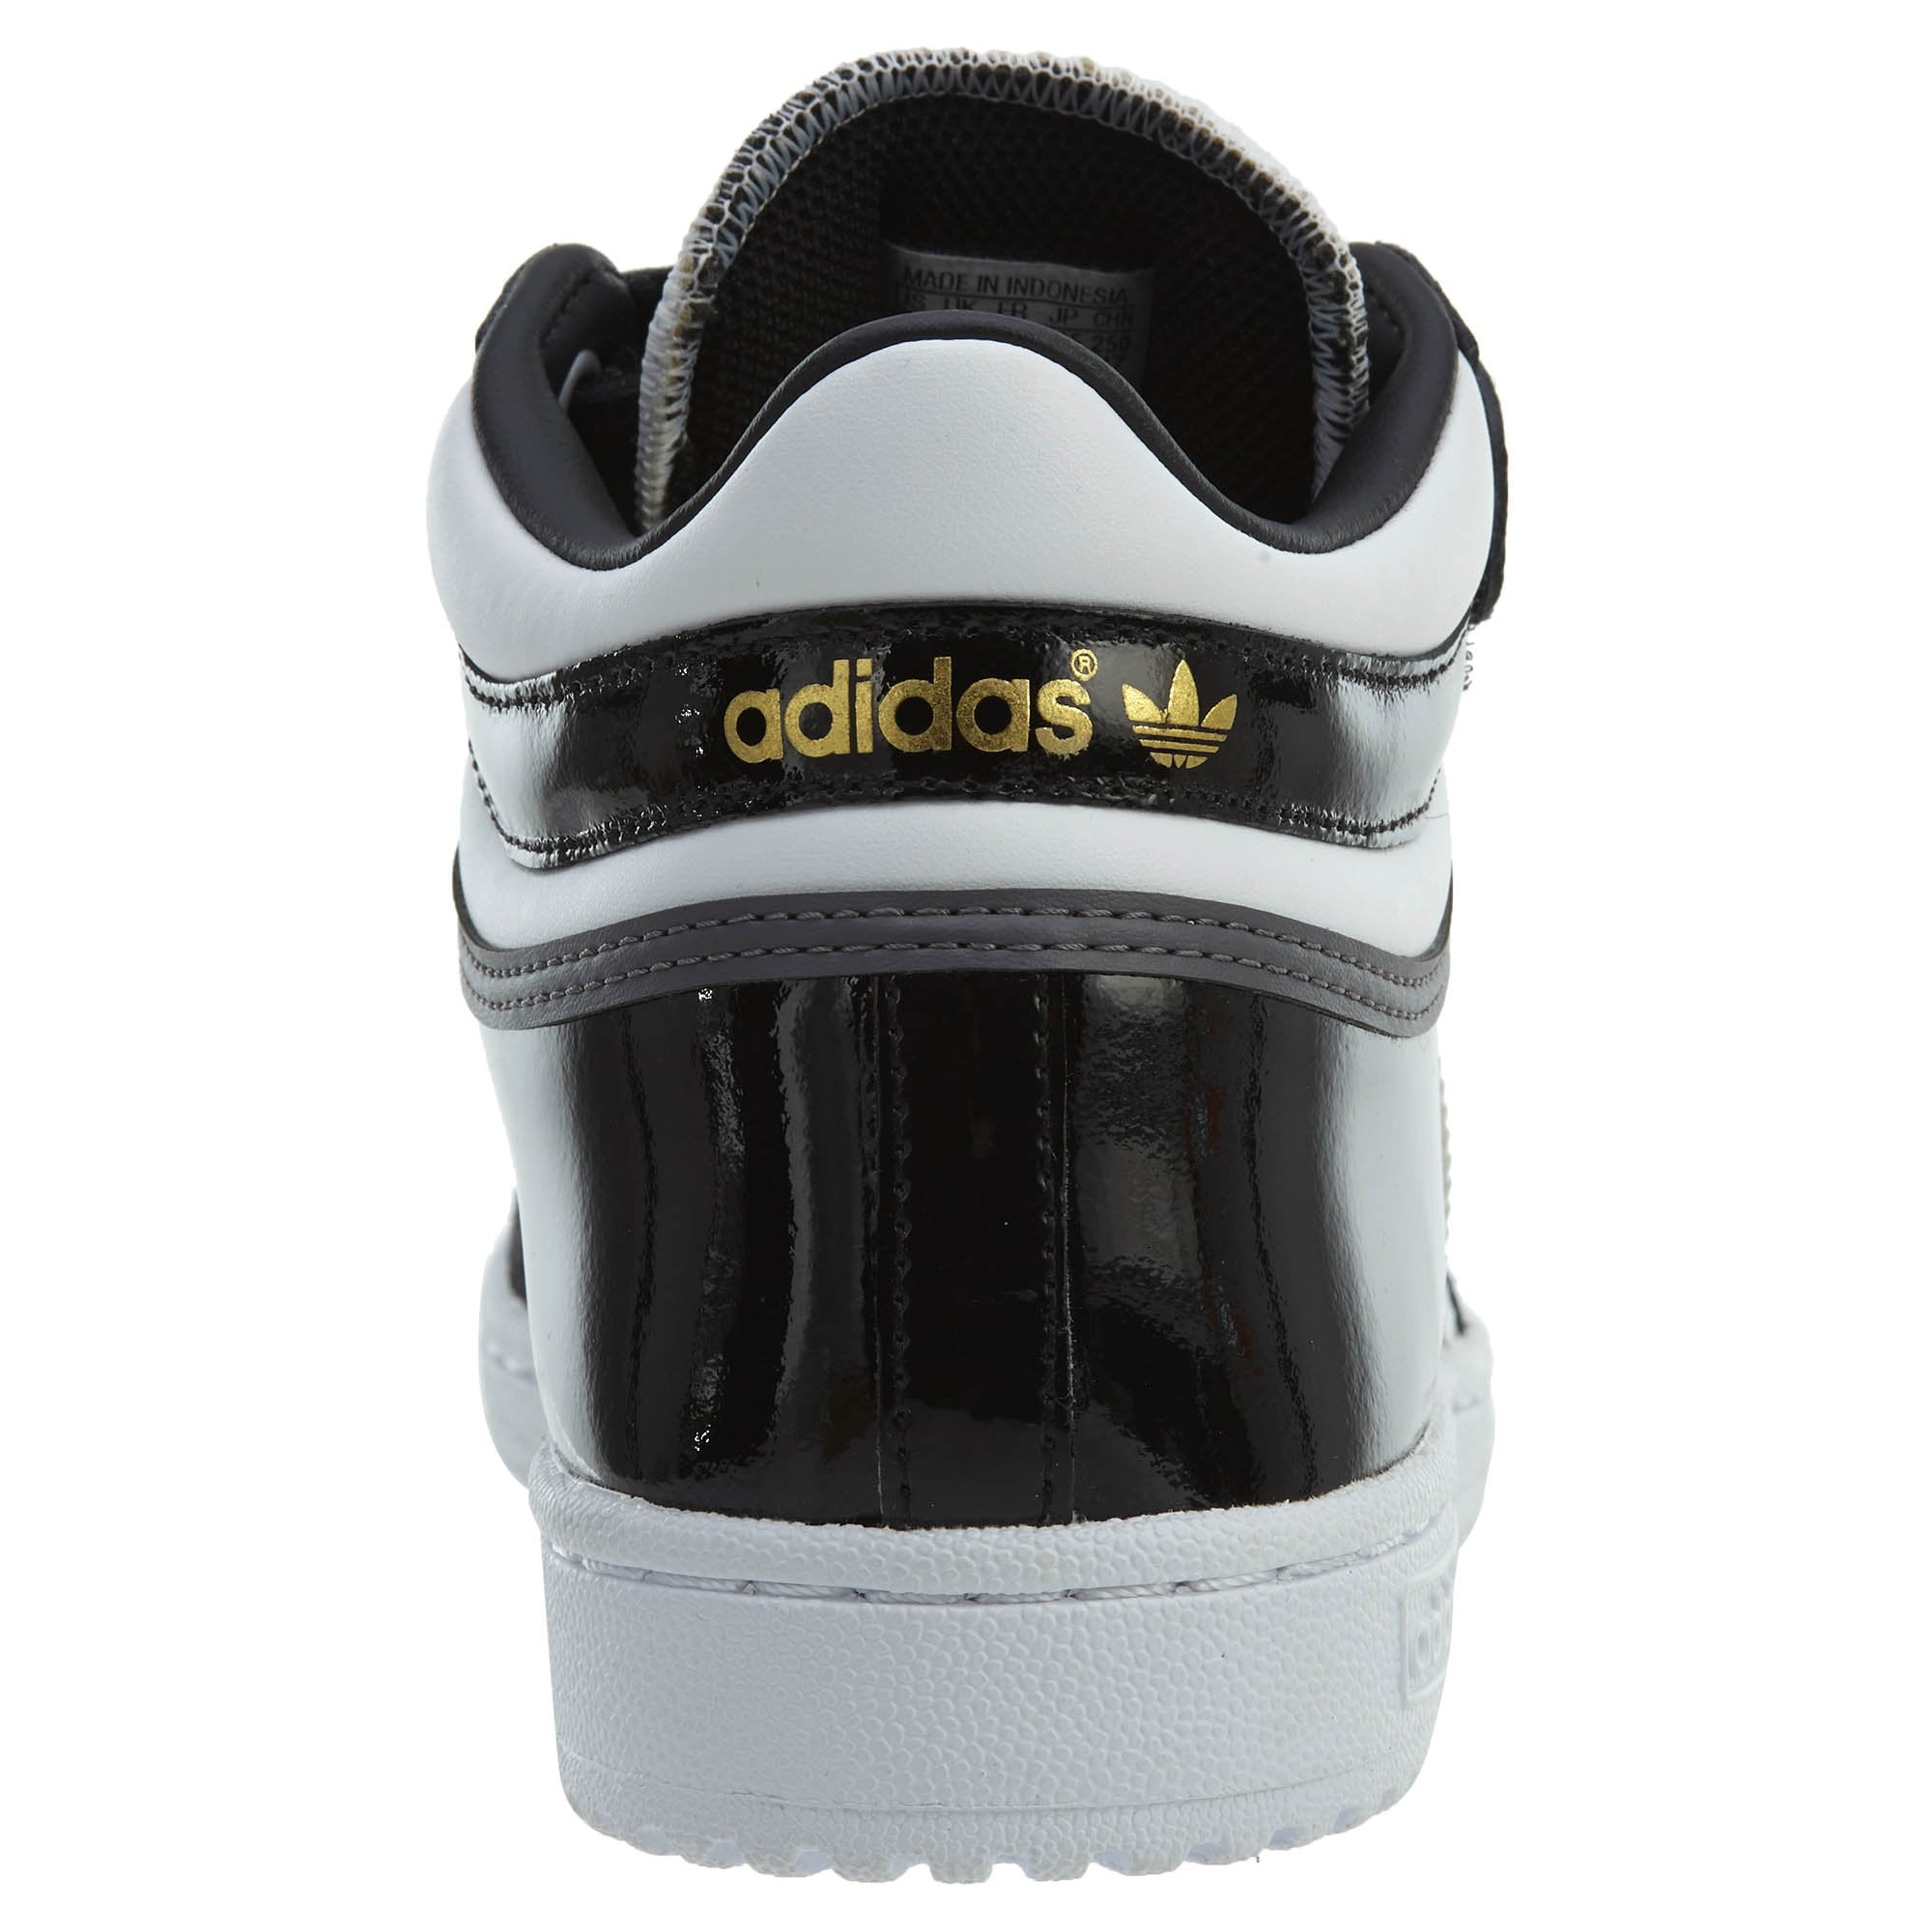 Adidas Concord Ii Mid Mens Style 